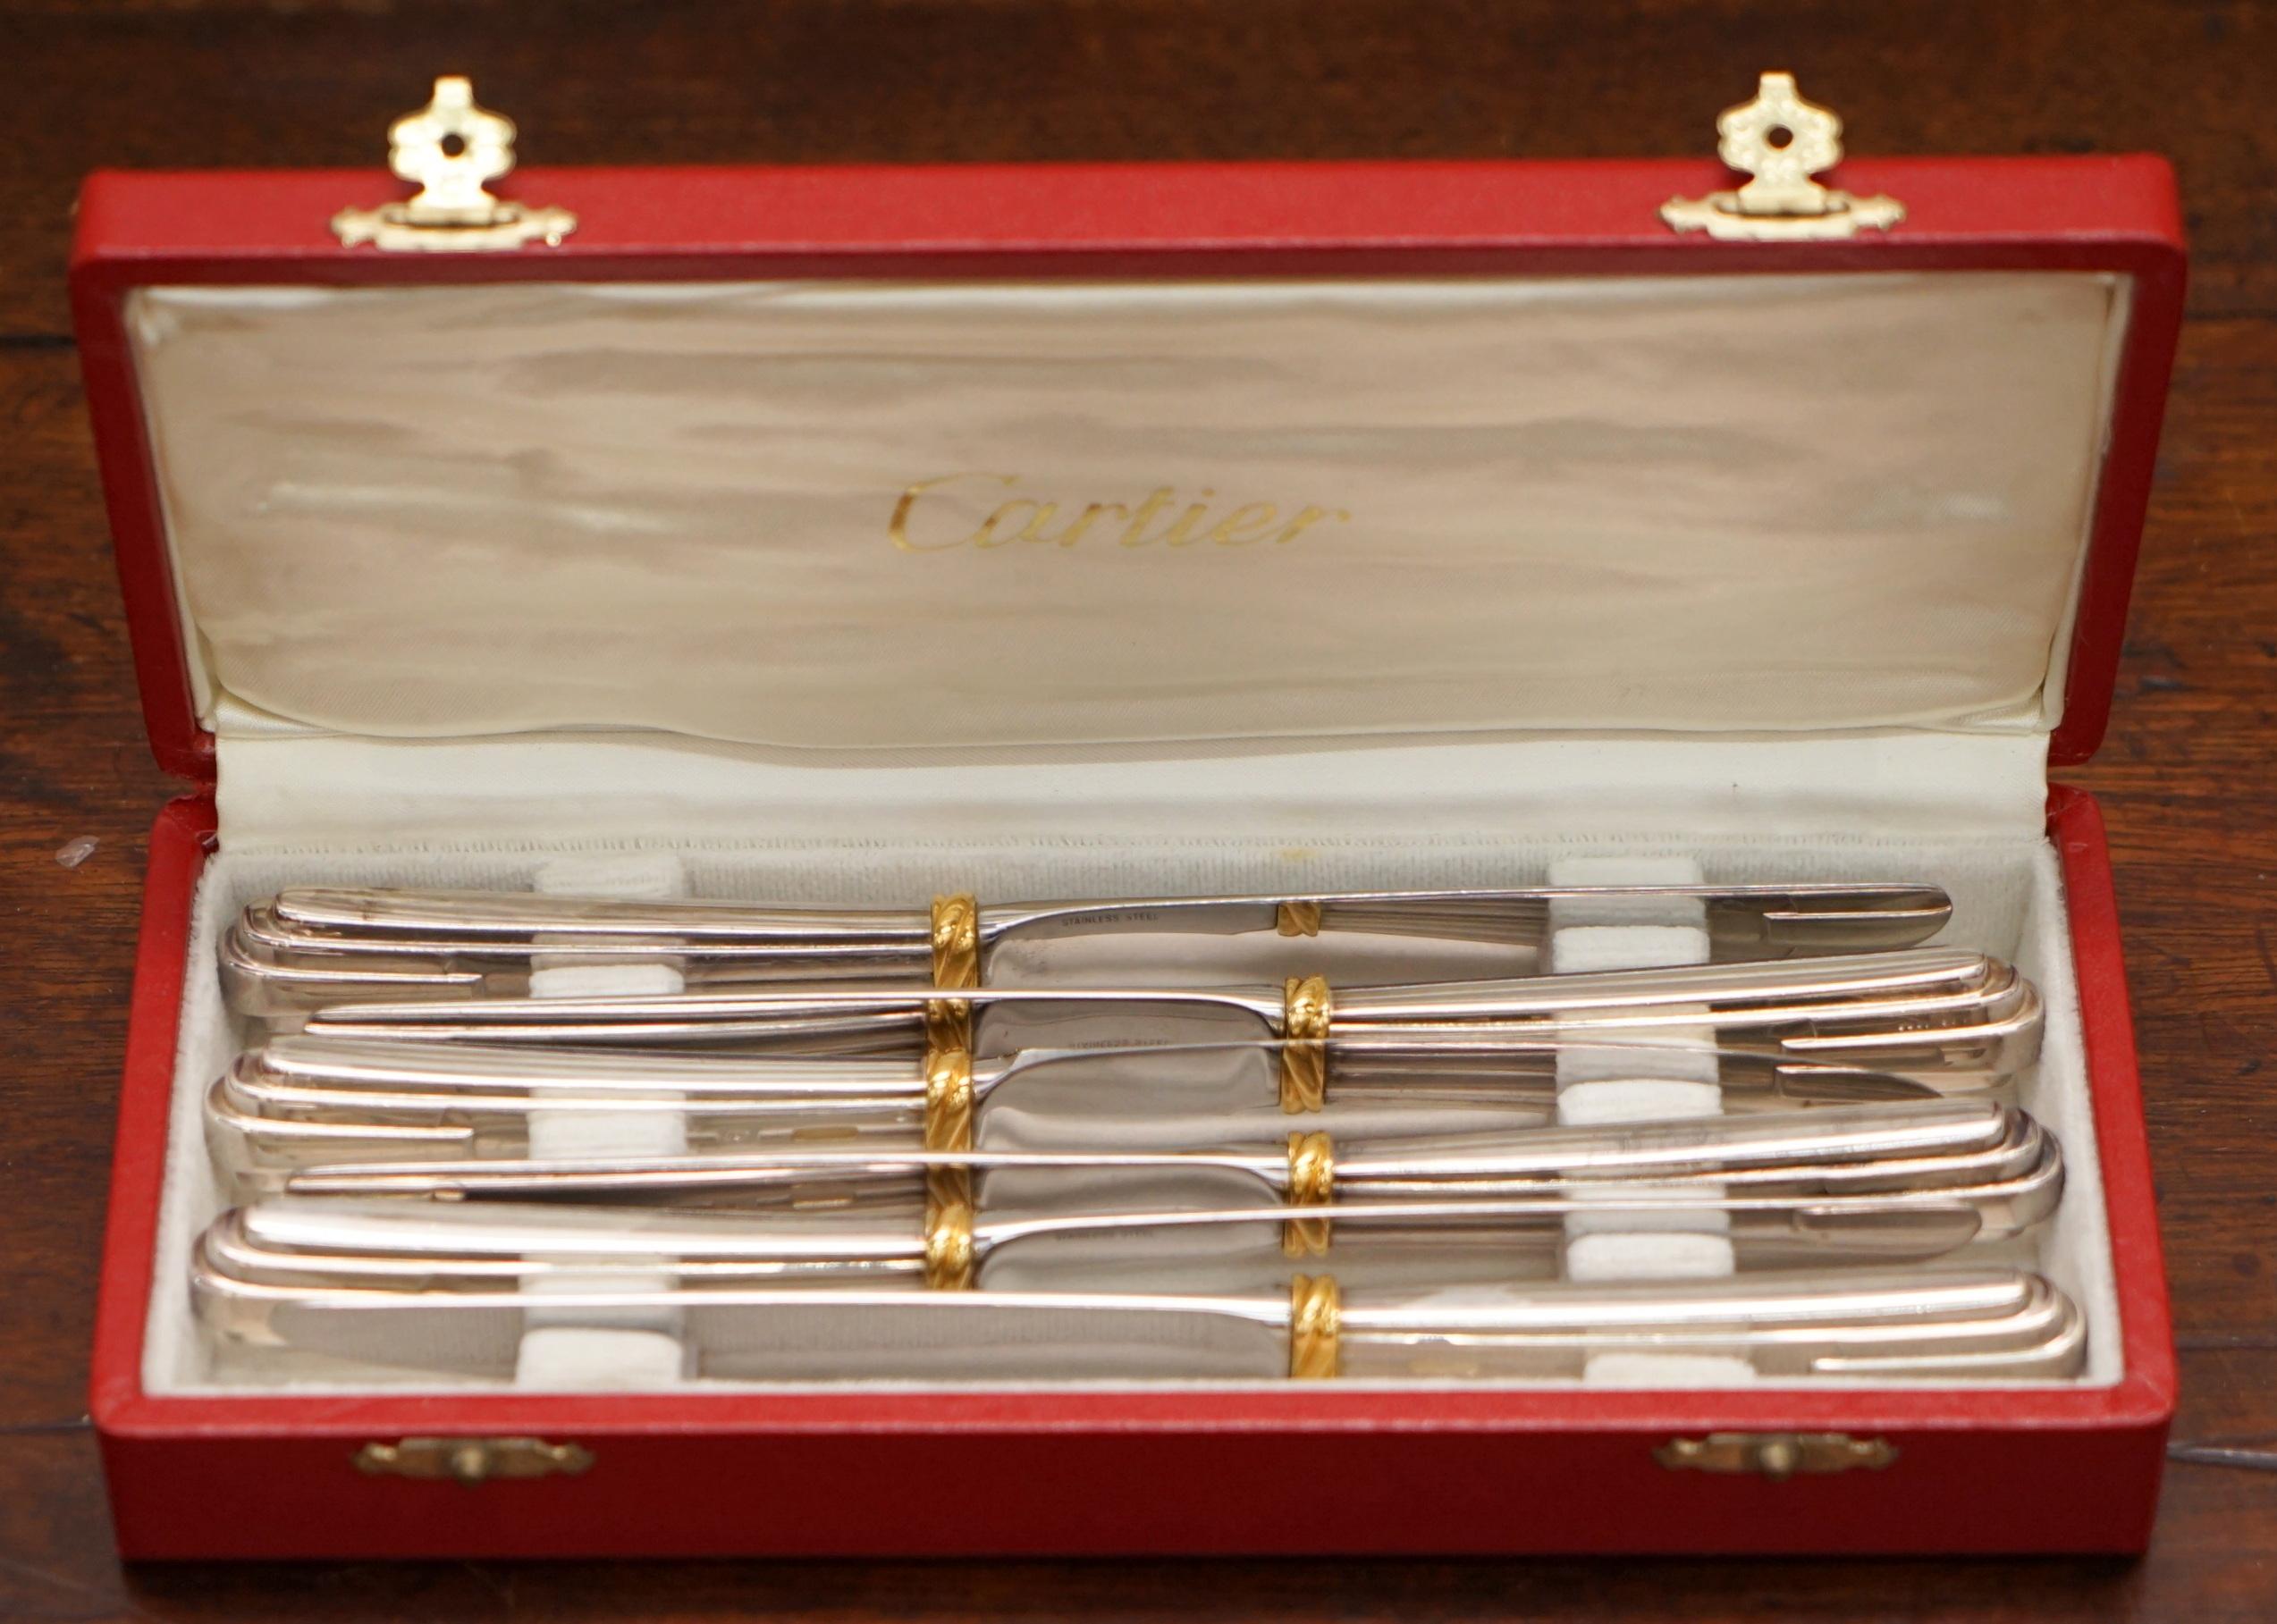 Wimbledon-Furniture

Wimbledon-Furniture is delighted to offer for sale this stunning set of six Solid Sterling silver with gold accents and boxed Cartier La Maison De Louis knives RRP £880

These are part of a suite, in total I have the large